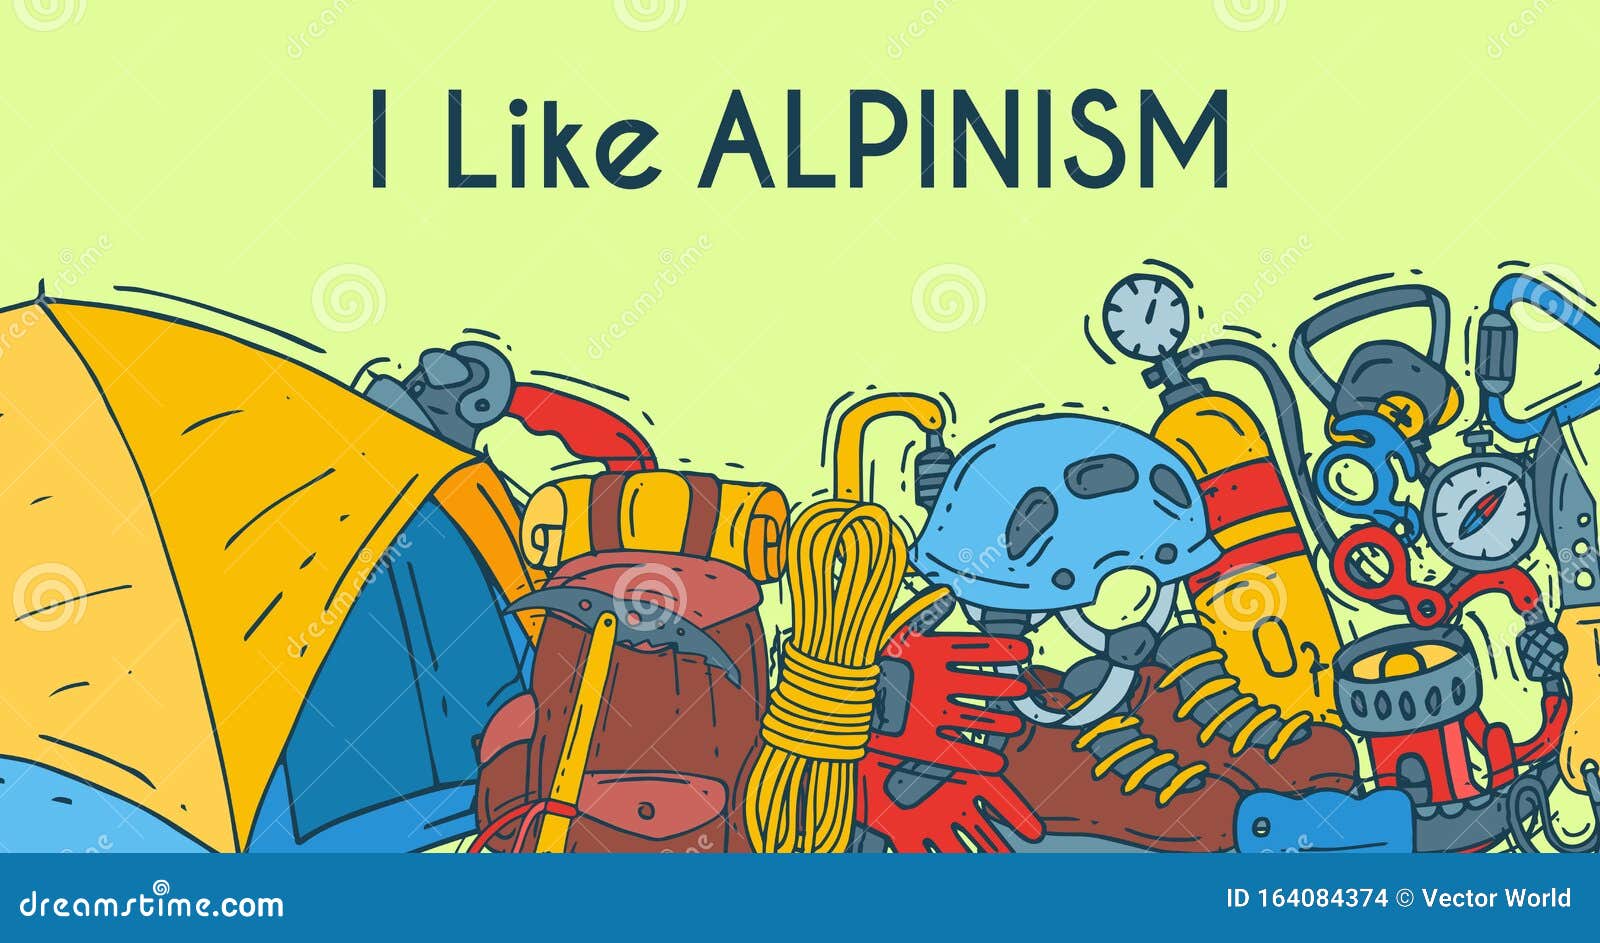 alpinism, mountain climbing and mountaineering cartoon s banner. hiking equipment  . hike for